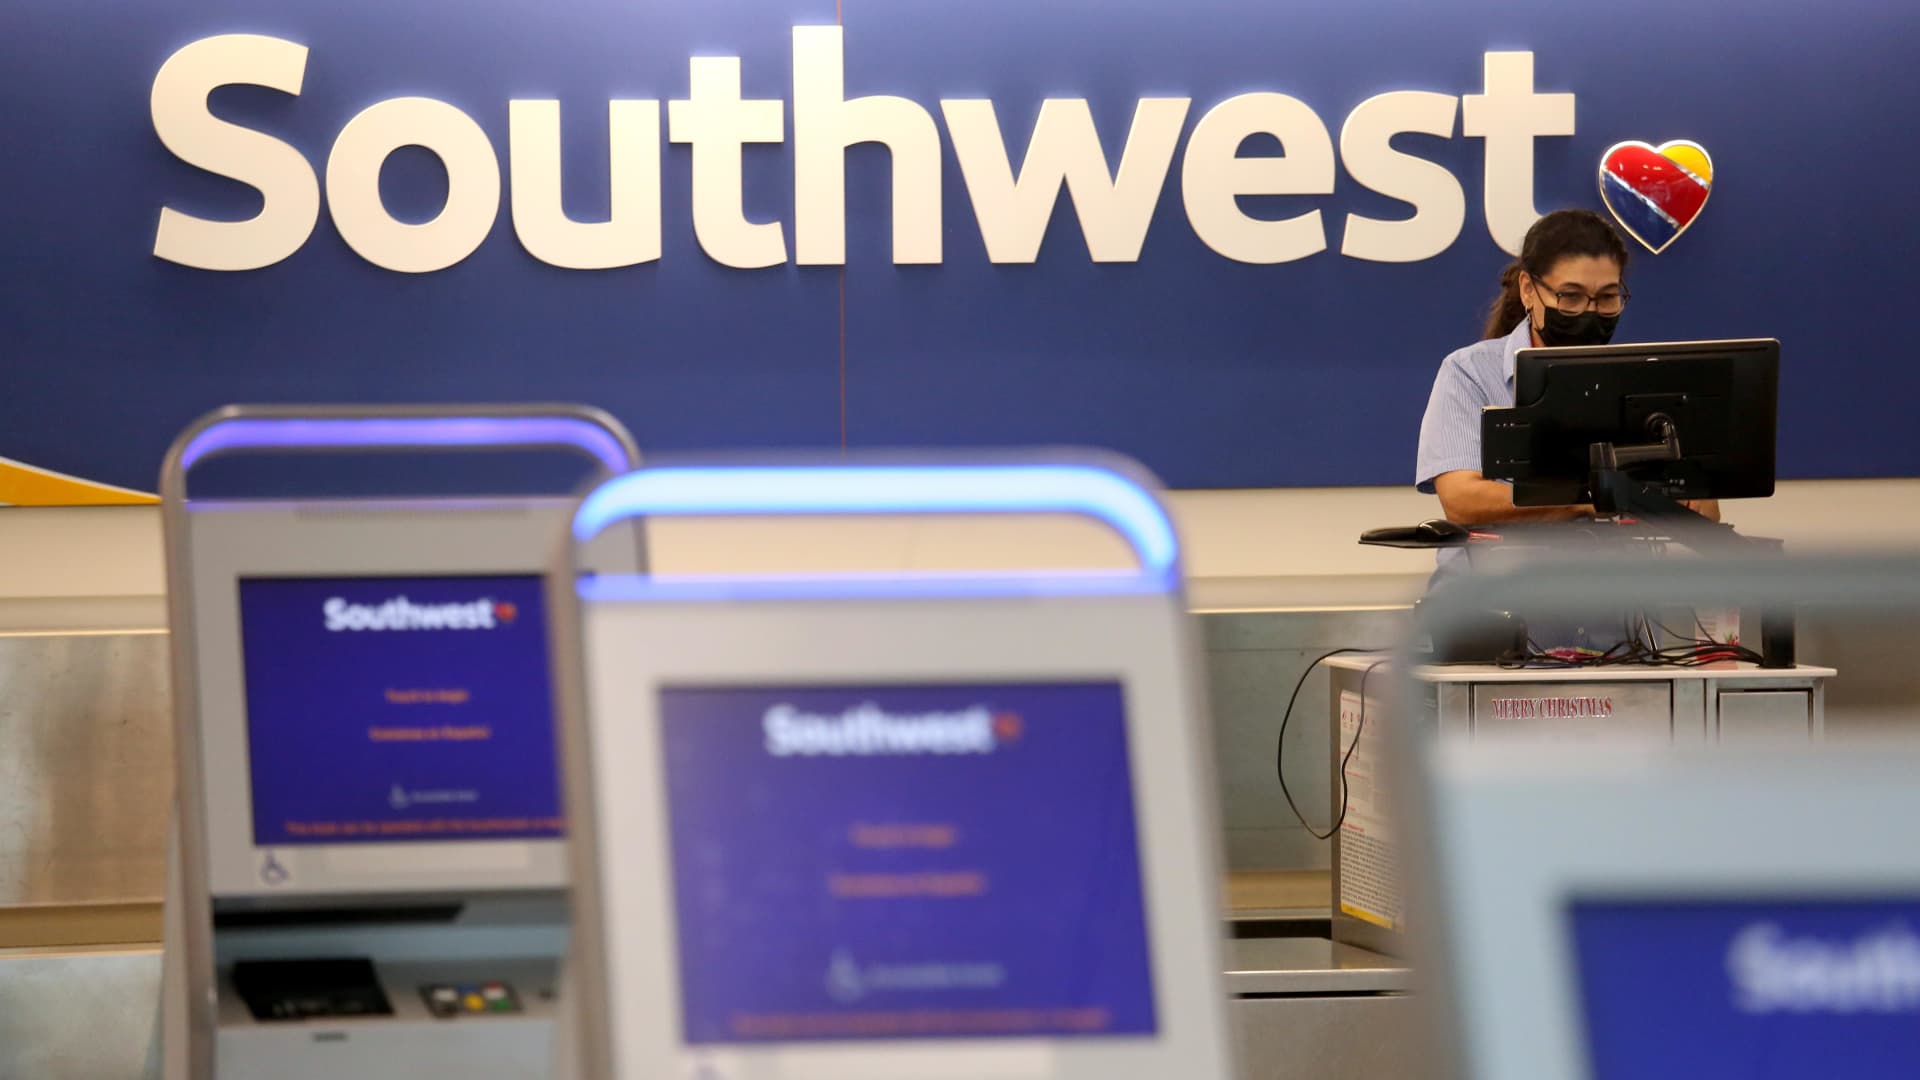 Can Southwest Airlines fix its tech problems? We asked aviation experts. The answer wasn’t encouraging